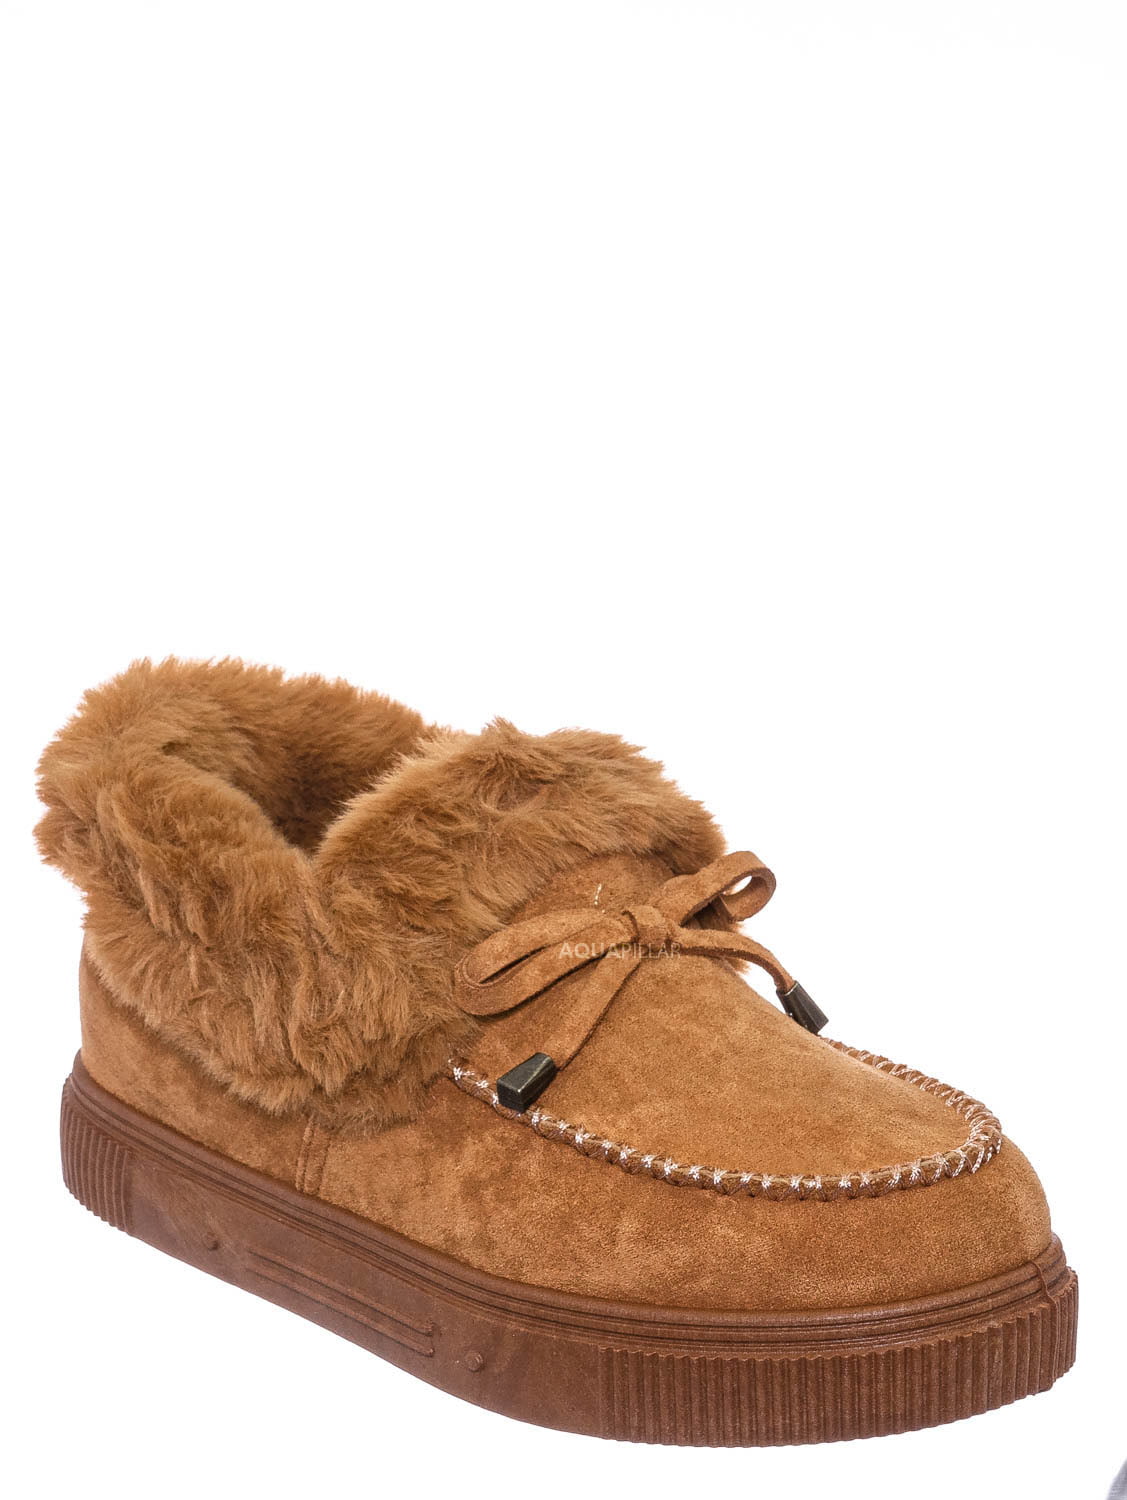 moccasin boot slippers